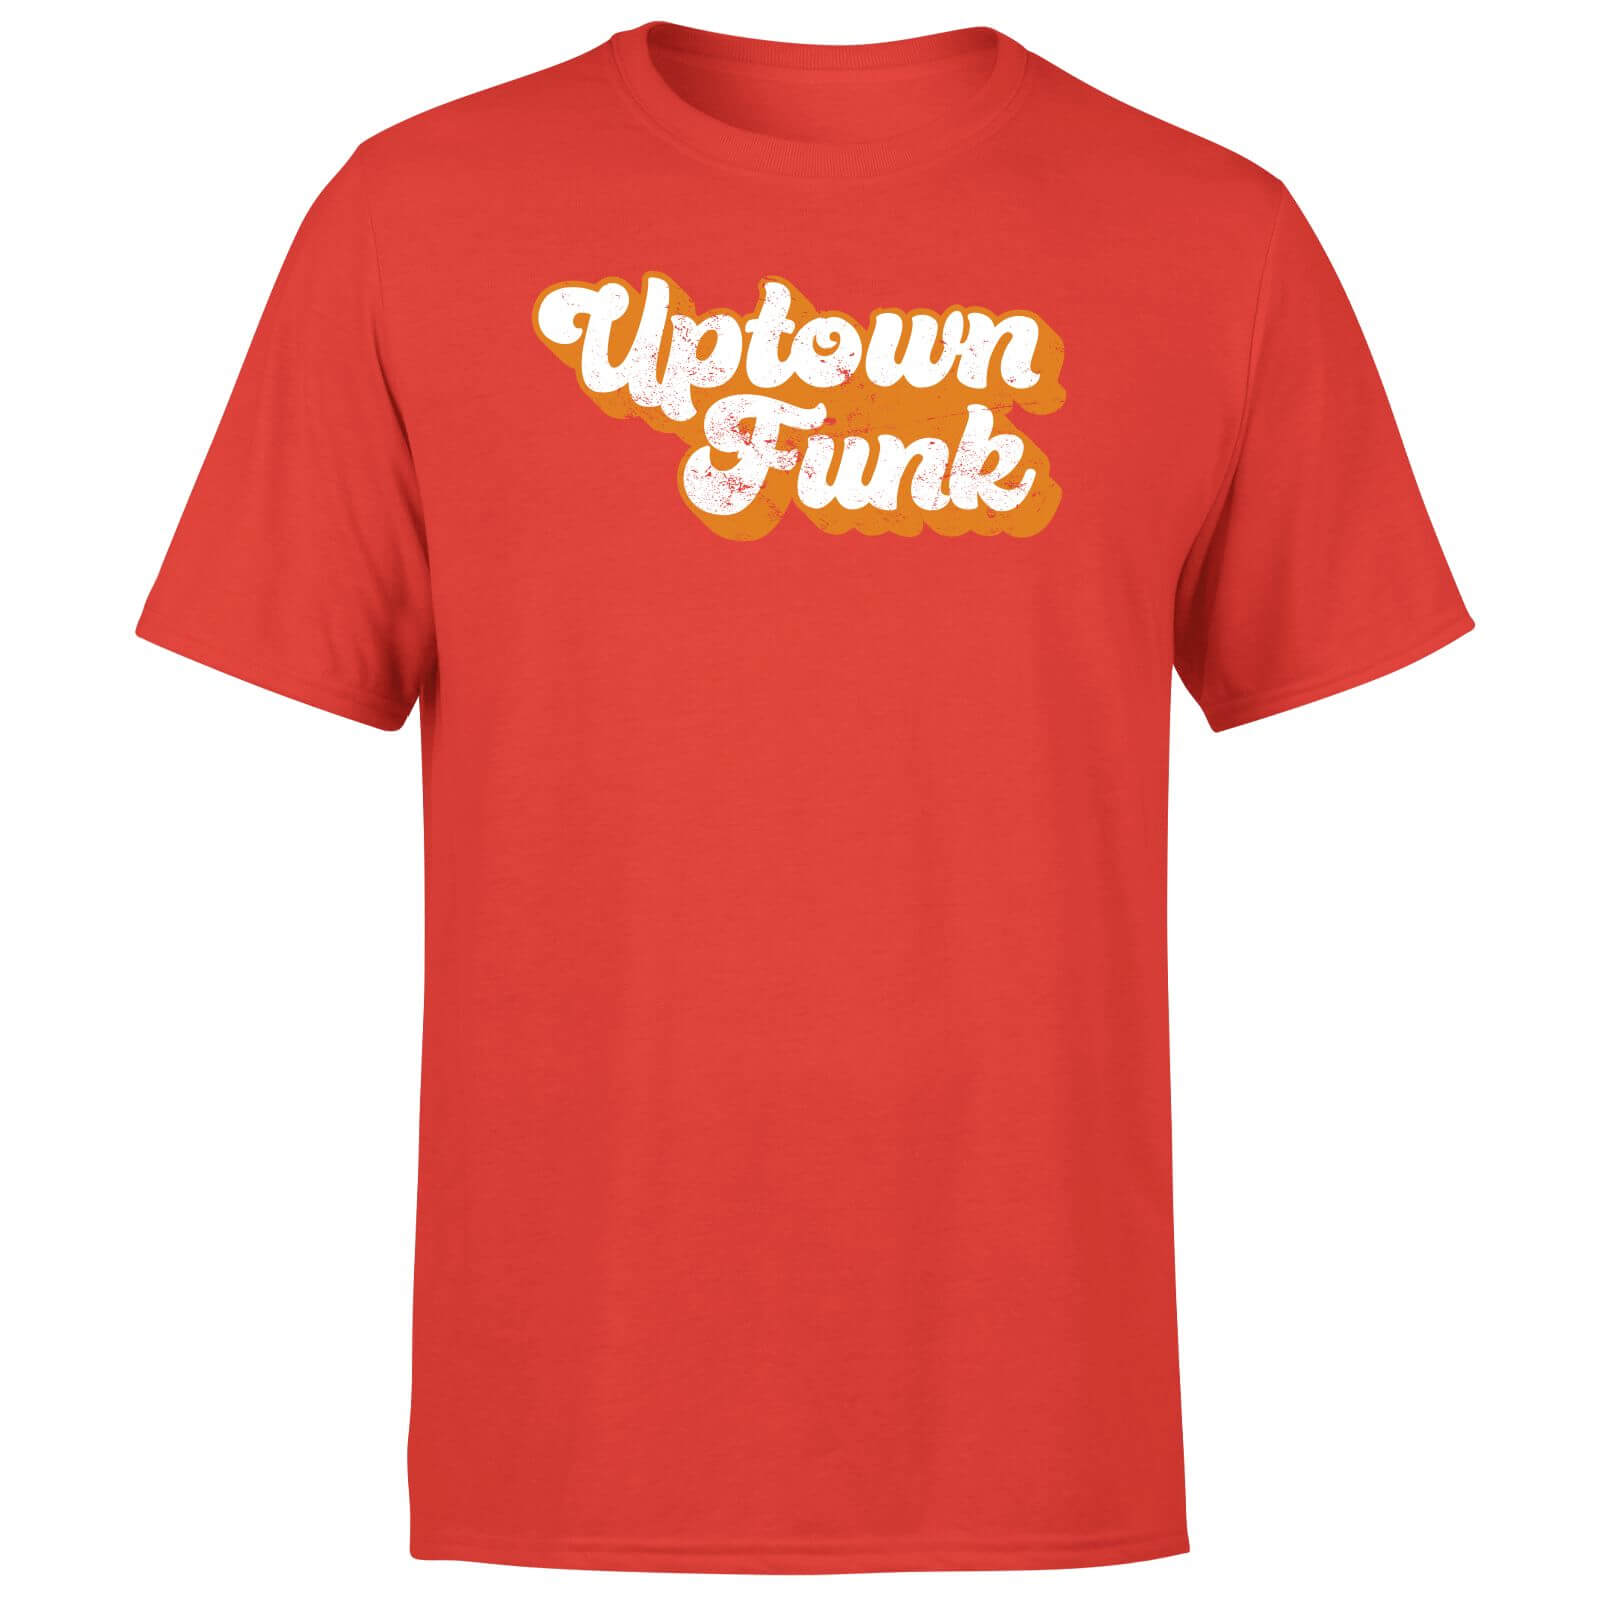 Uptown Funk Men's T-Shirt - Red - XS - Red